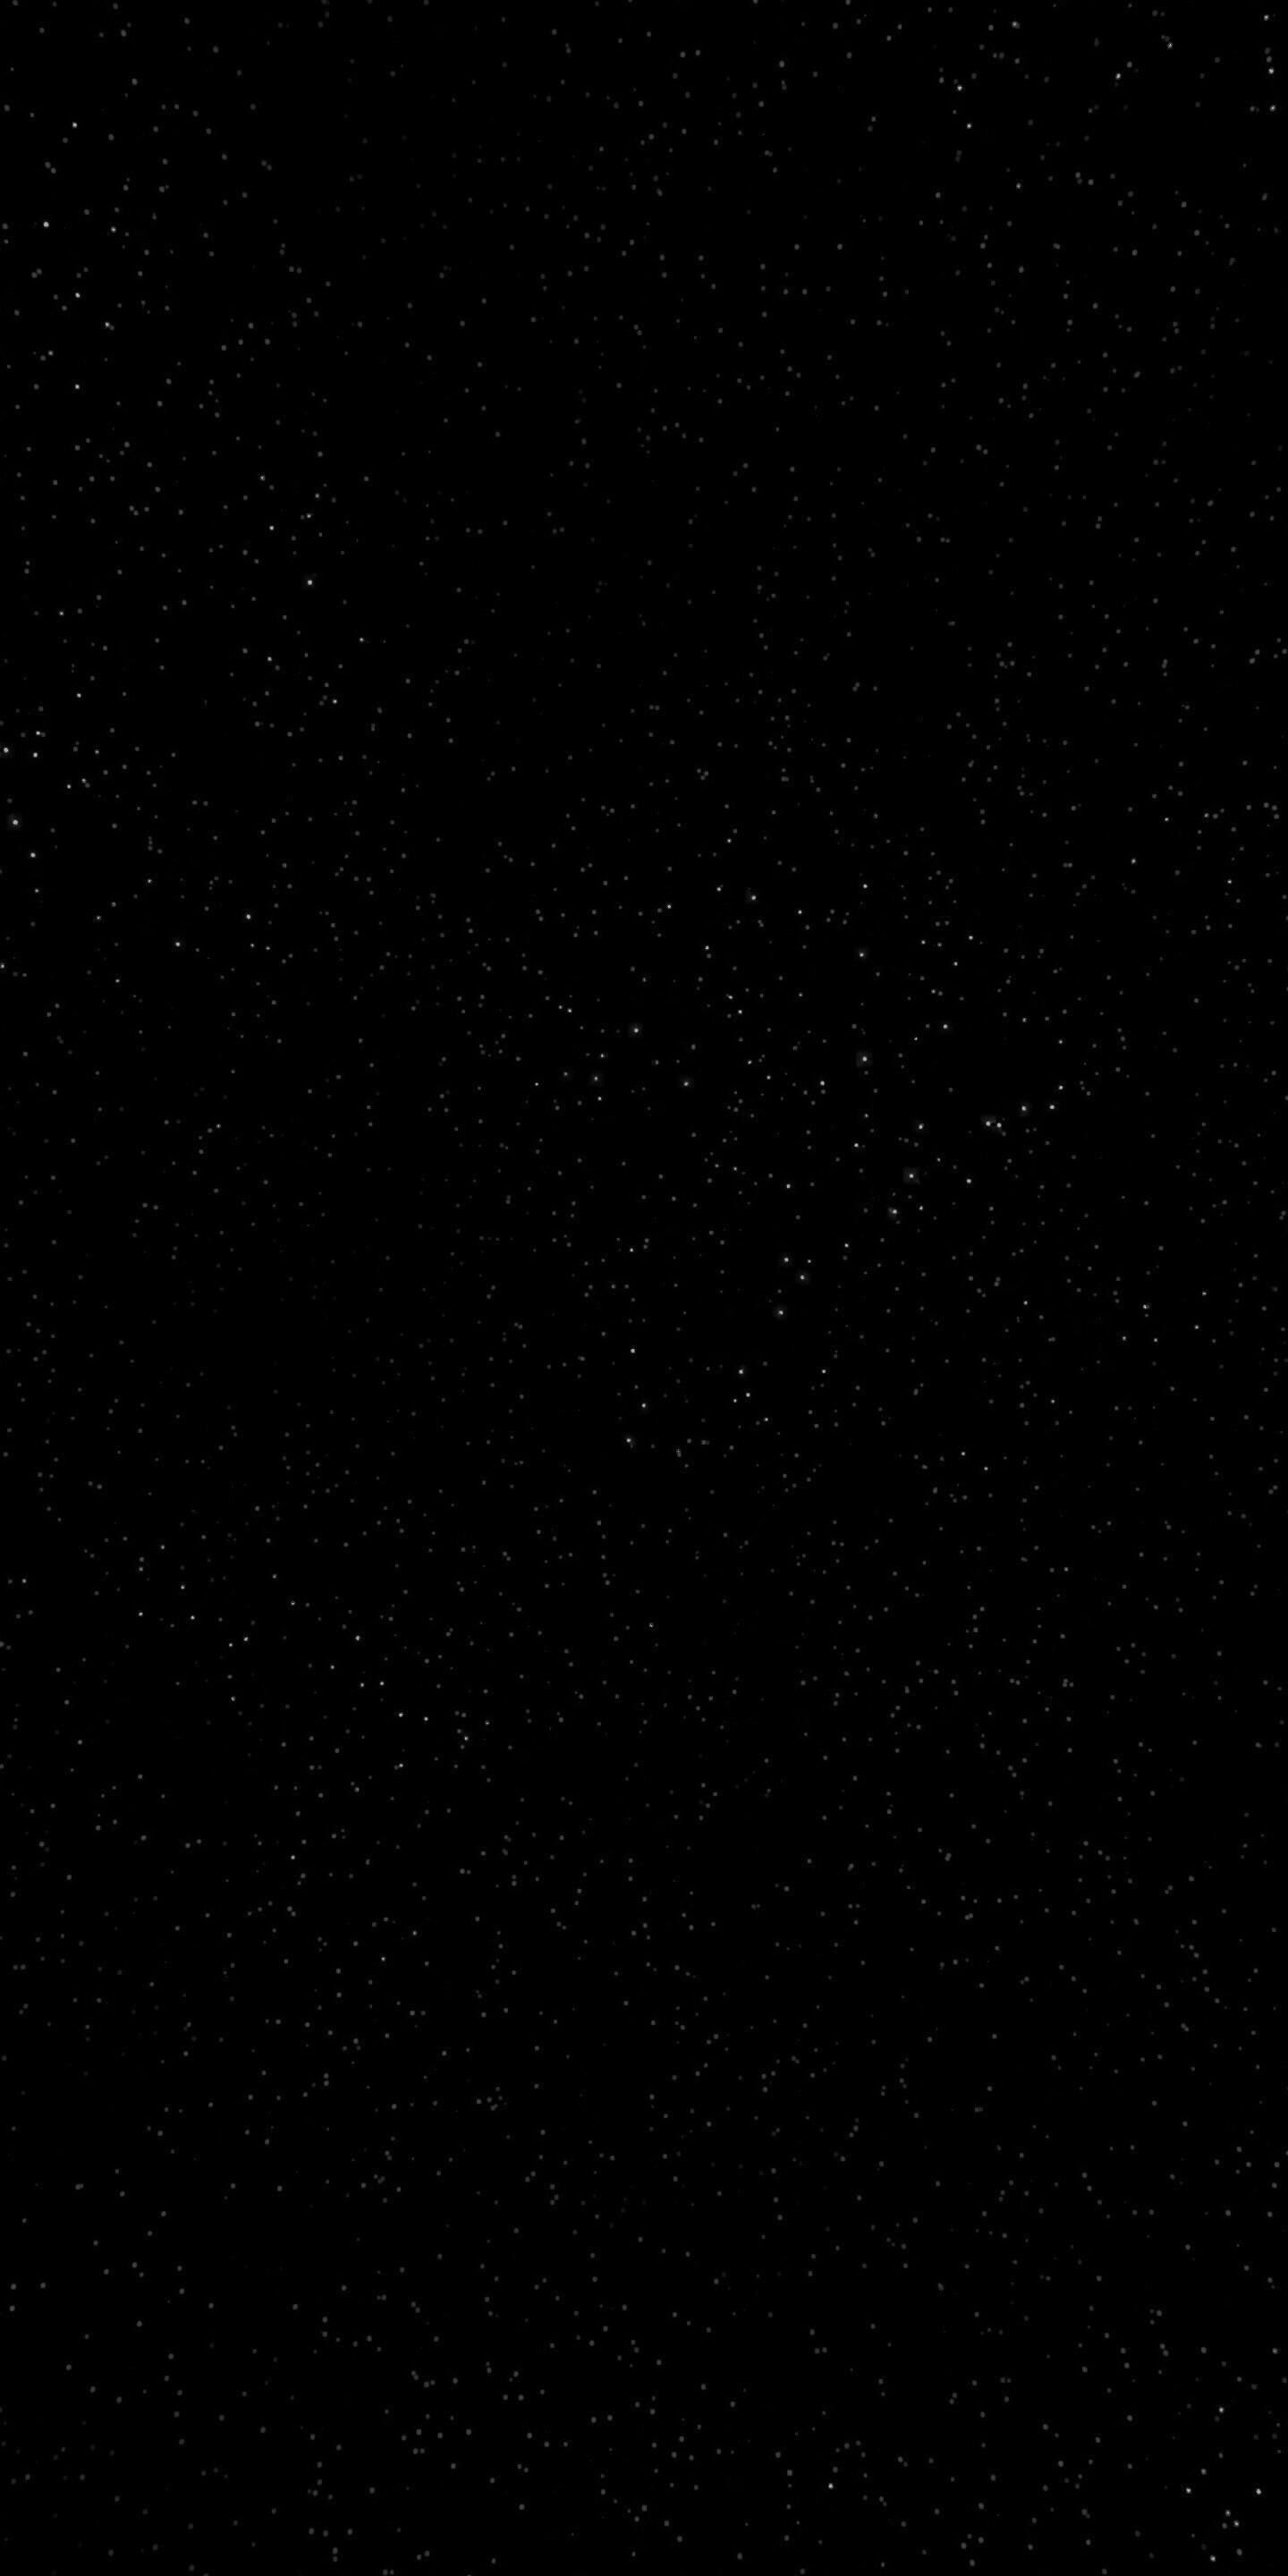 So I wanted a black wallpaper for my iPhone X but found true black